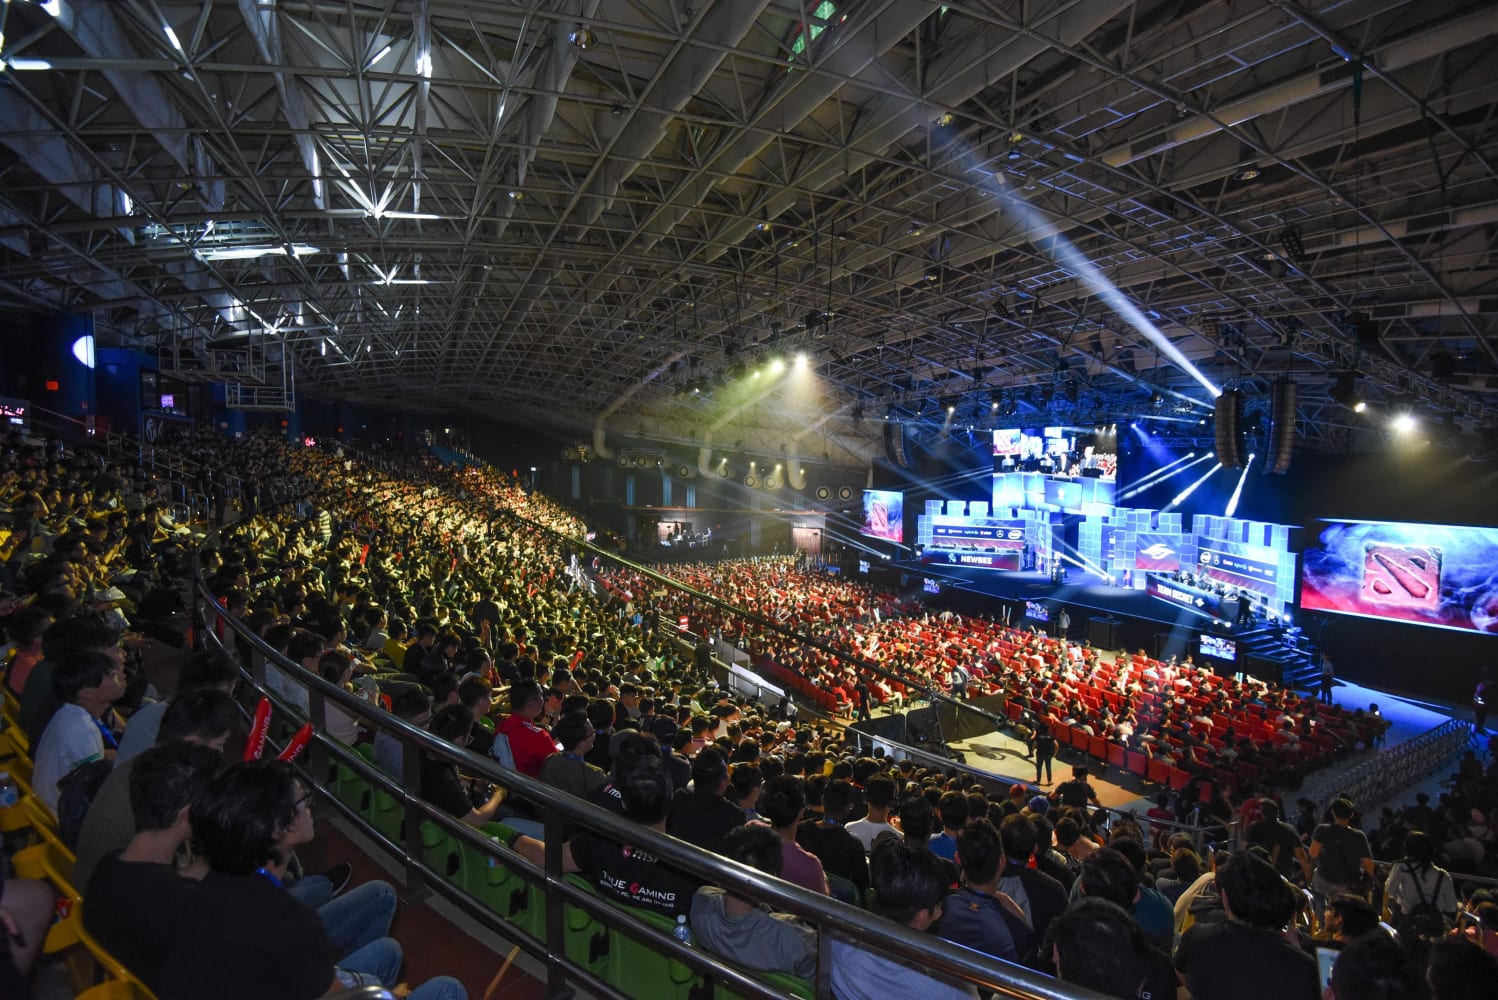 Did ESL One Genting 2018 live up to its hype?